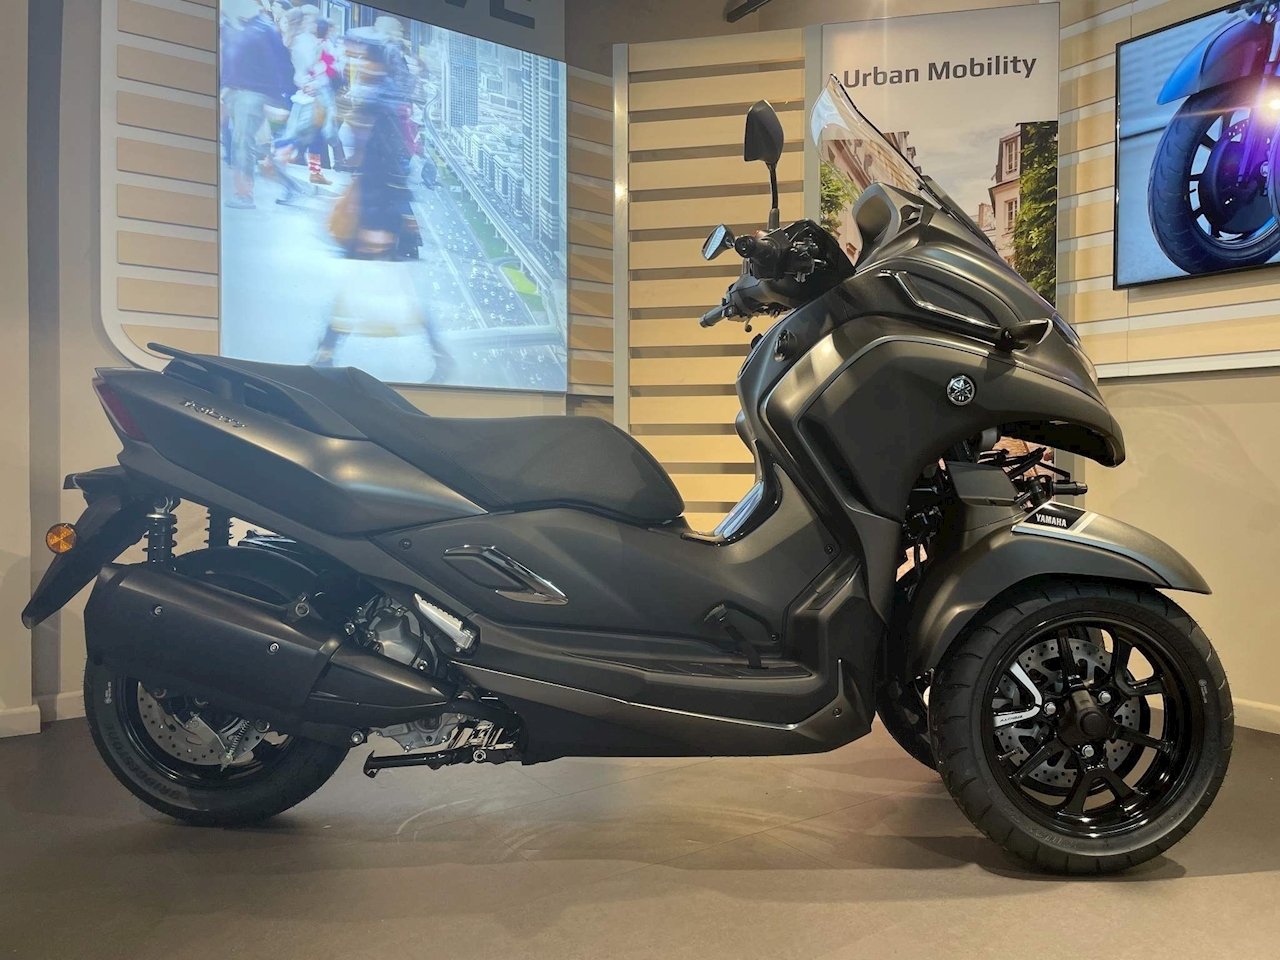 New 2022 Yamaha Tricity 300 Tricity For Sale in Cheshire (N474)